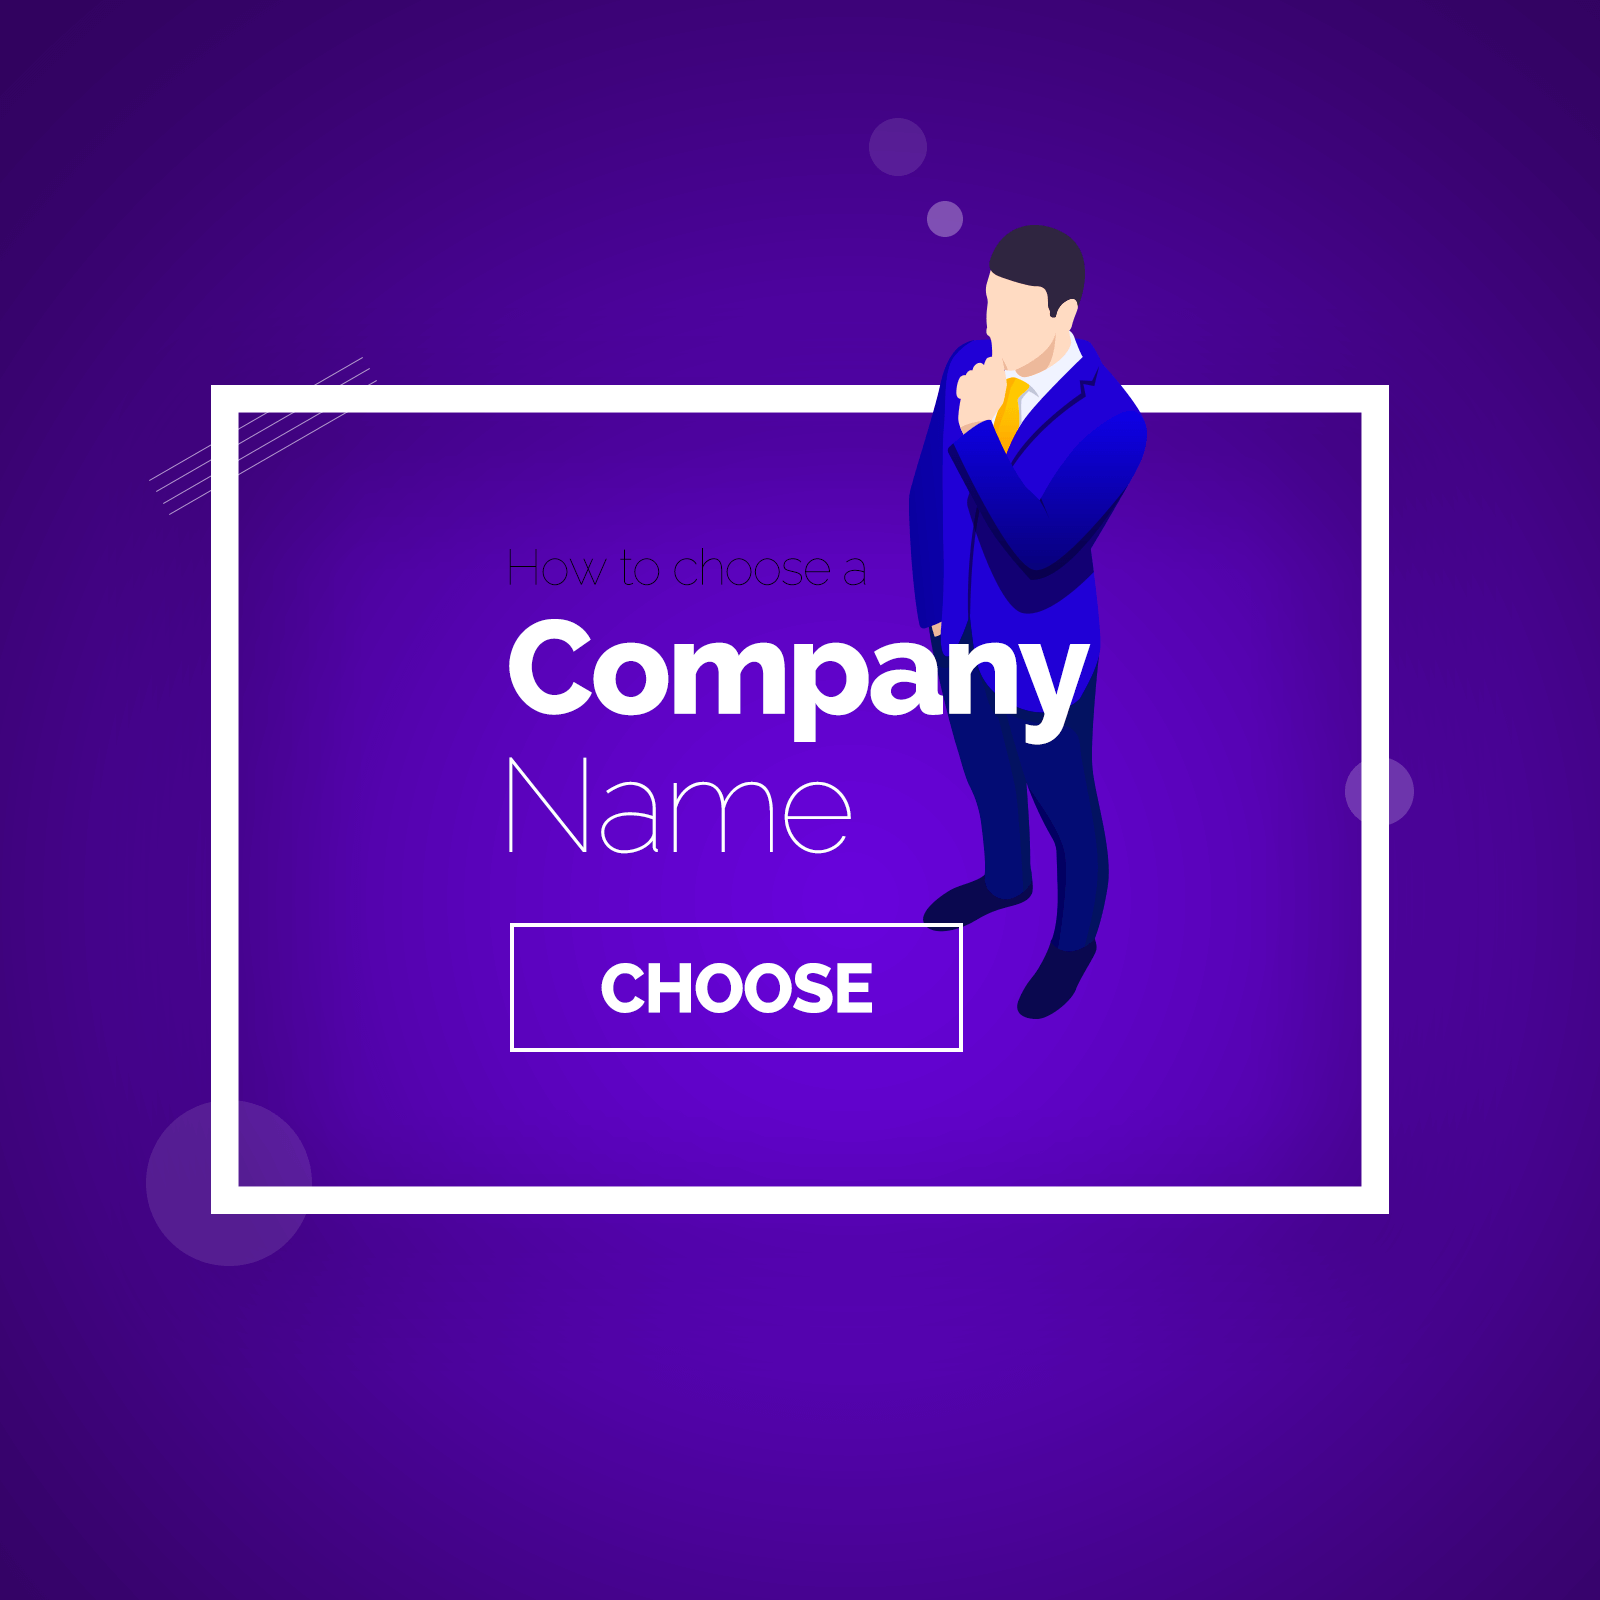 How to choose a business name?